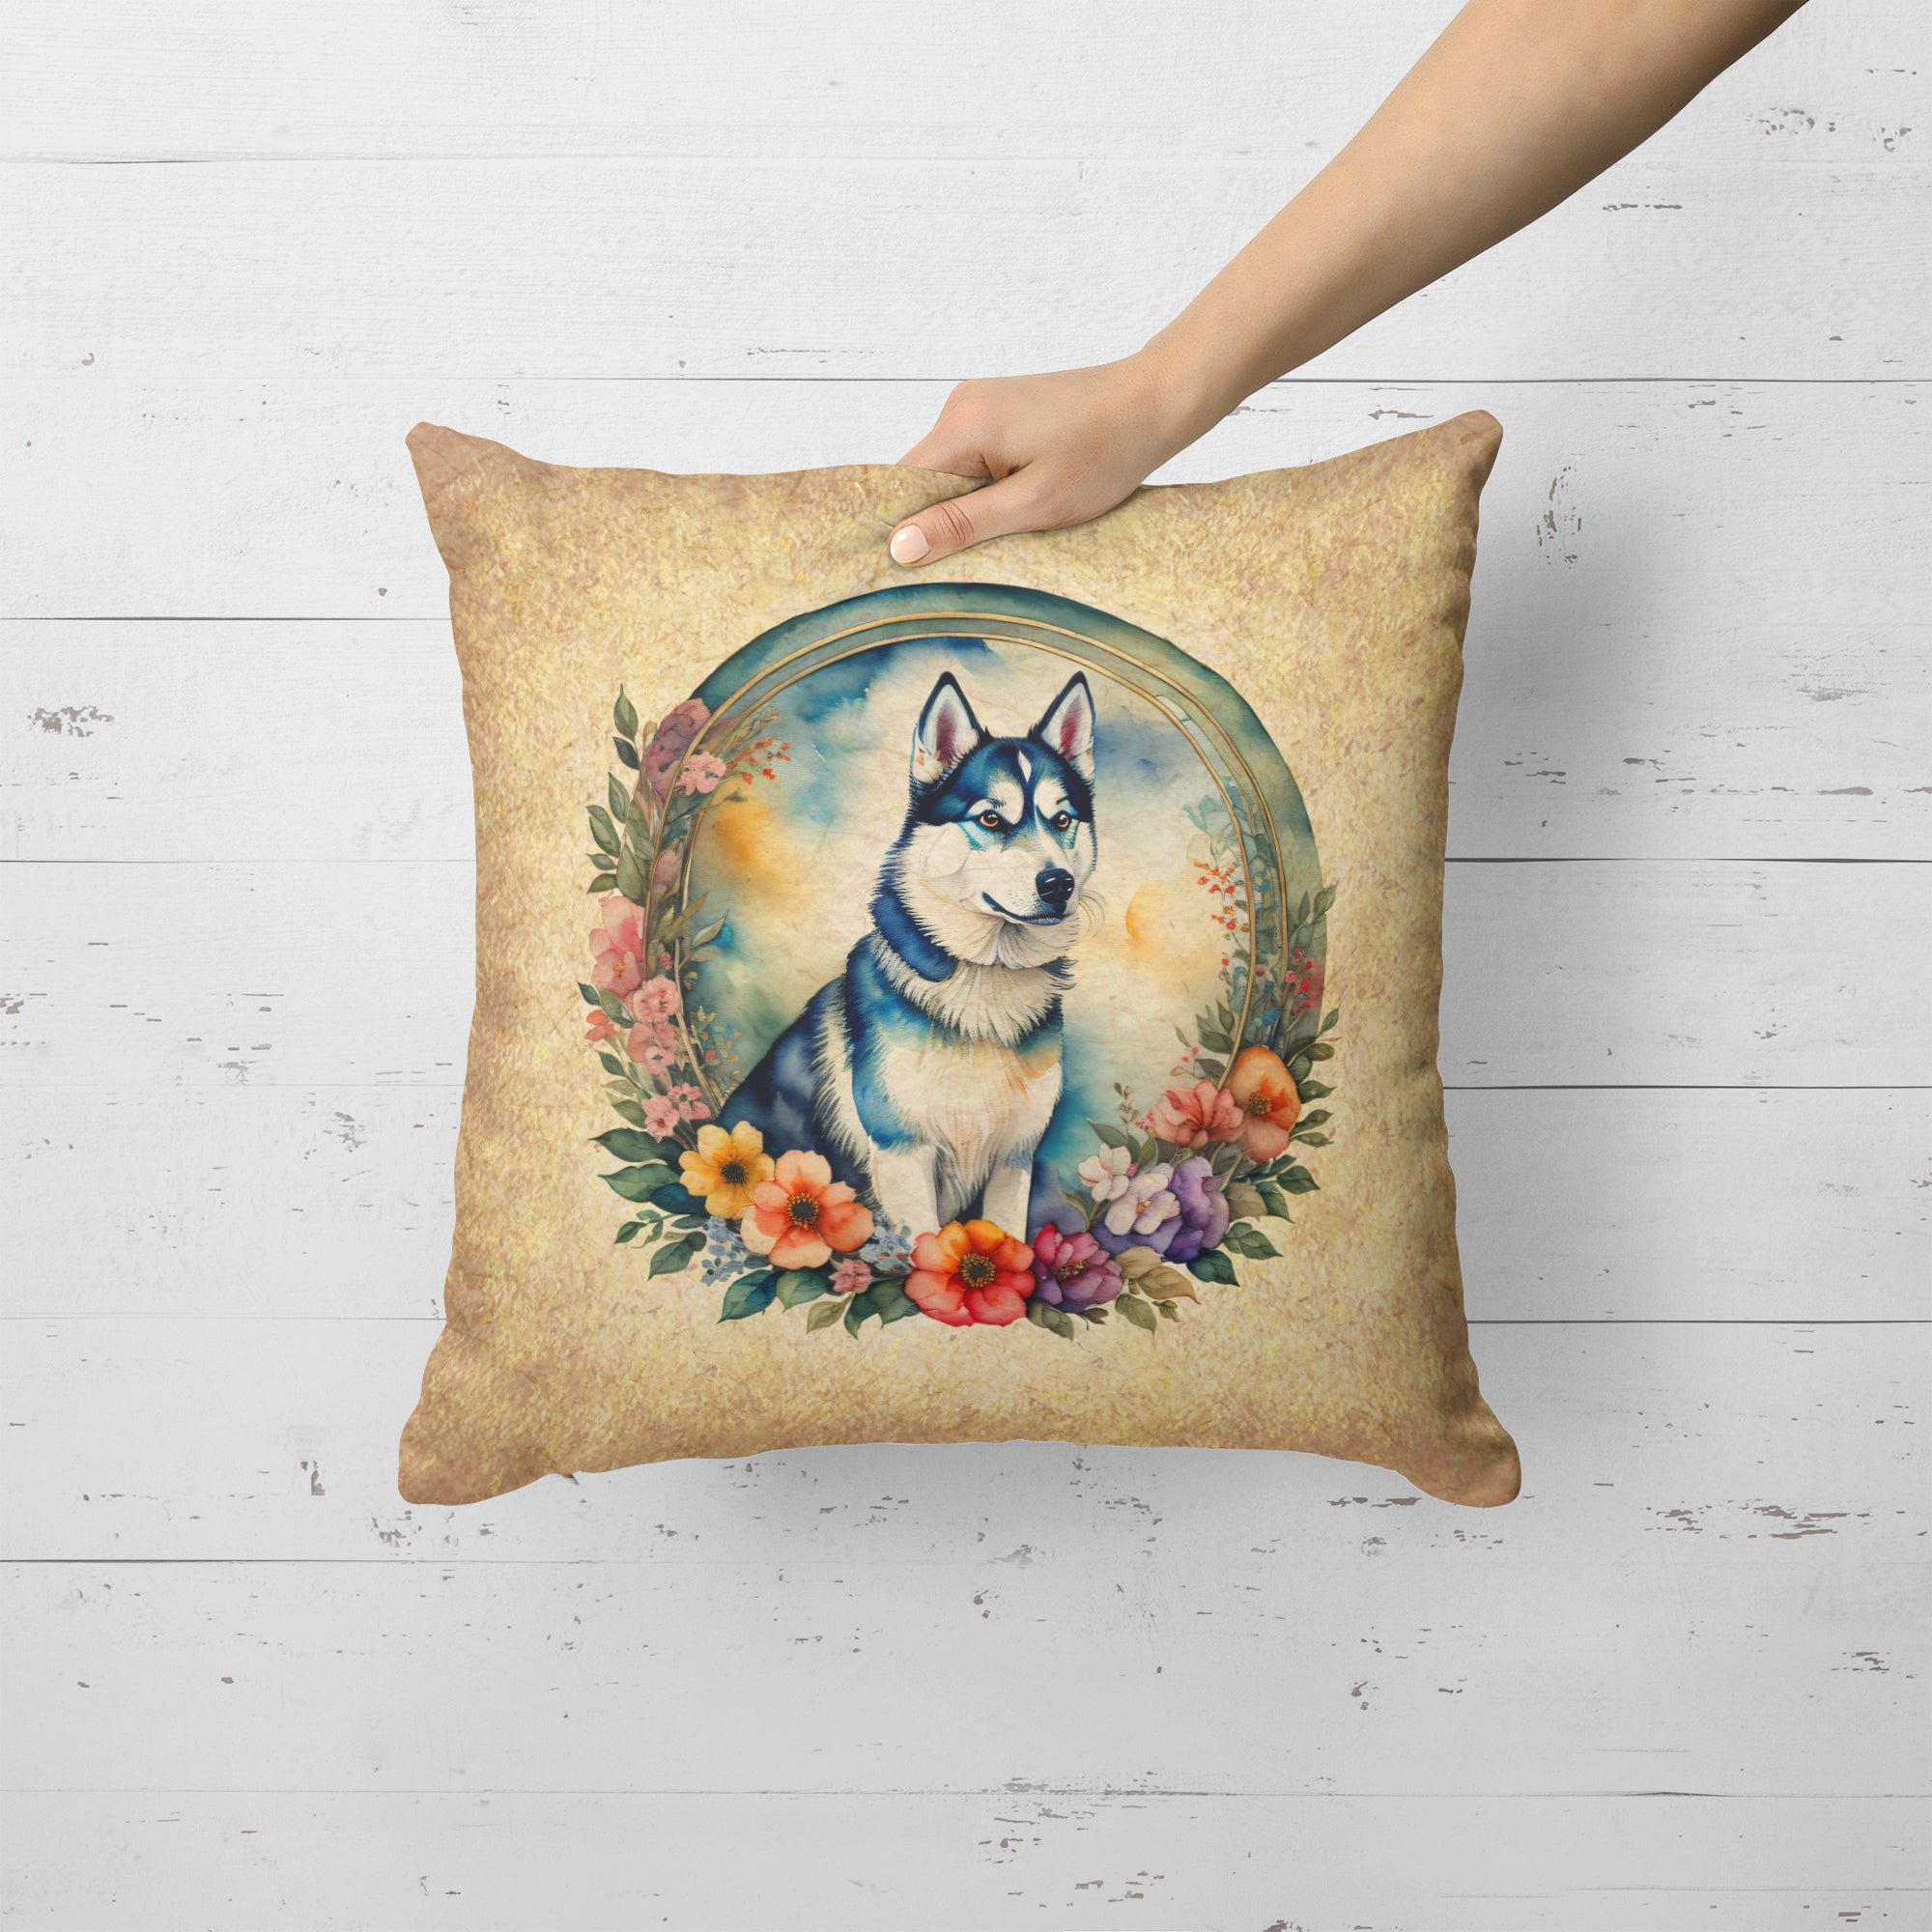 Buy this Siberian Husky and Flowers Fabric Decorative Pillow